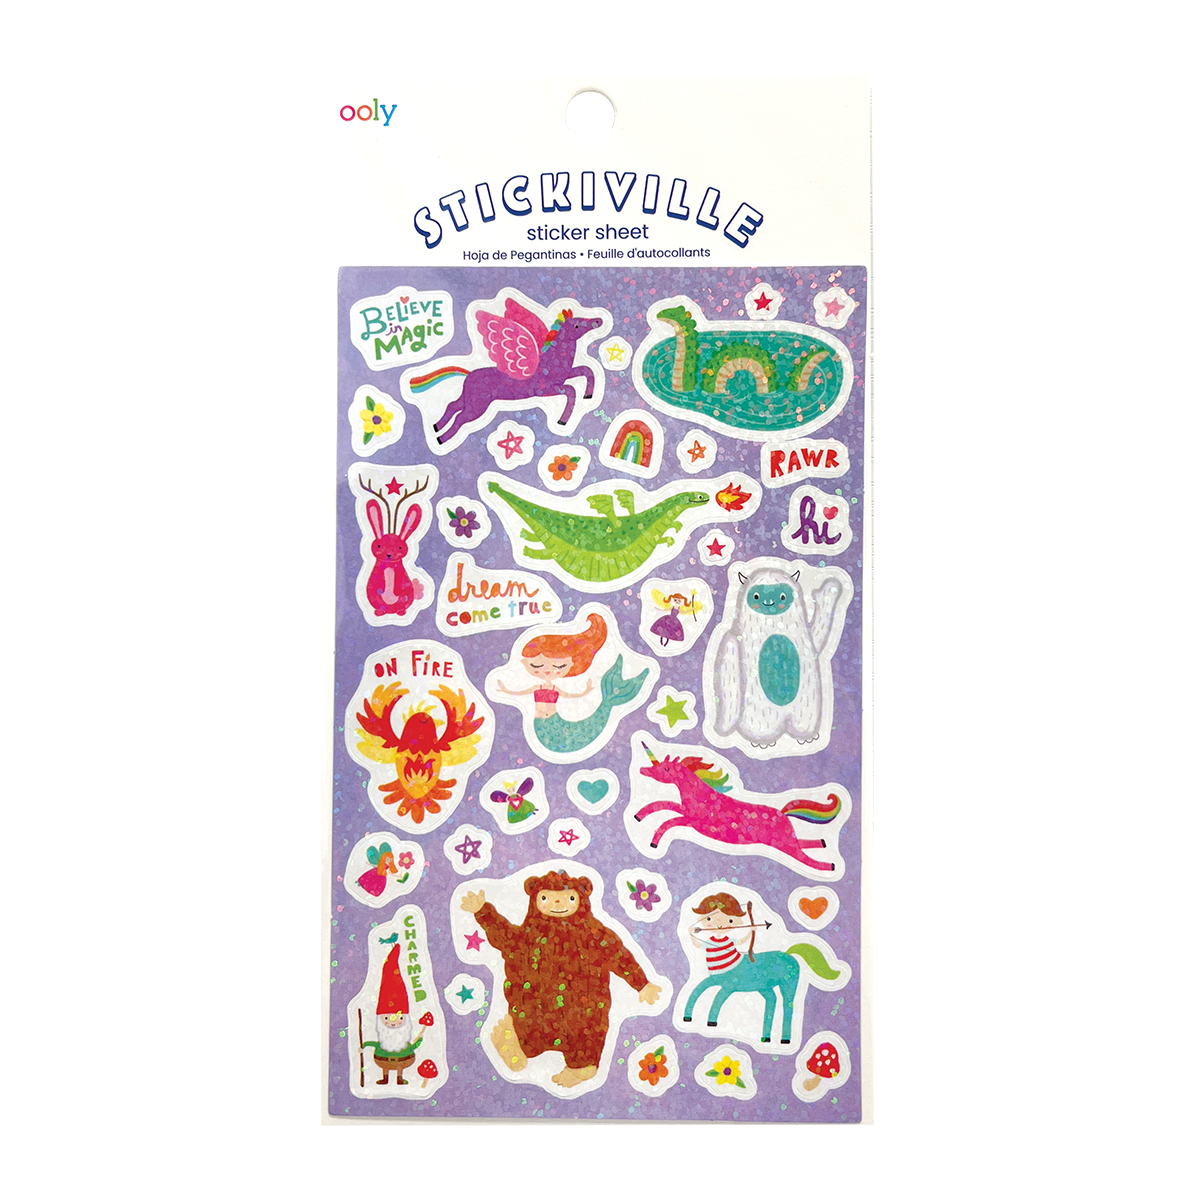 OOLY Stickiville Magic Land Stickers inside packaging